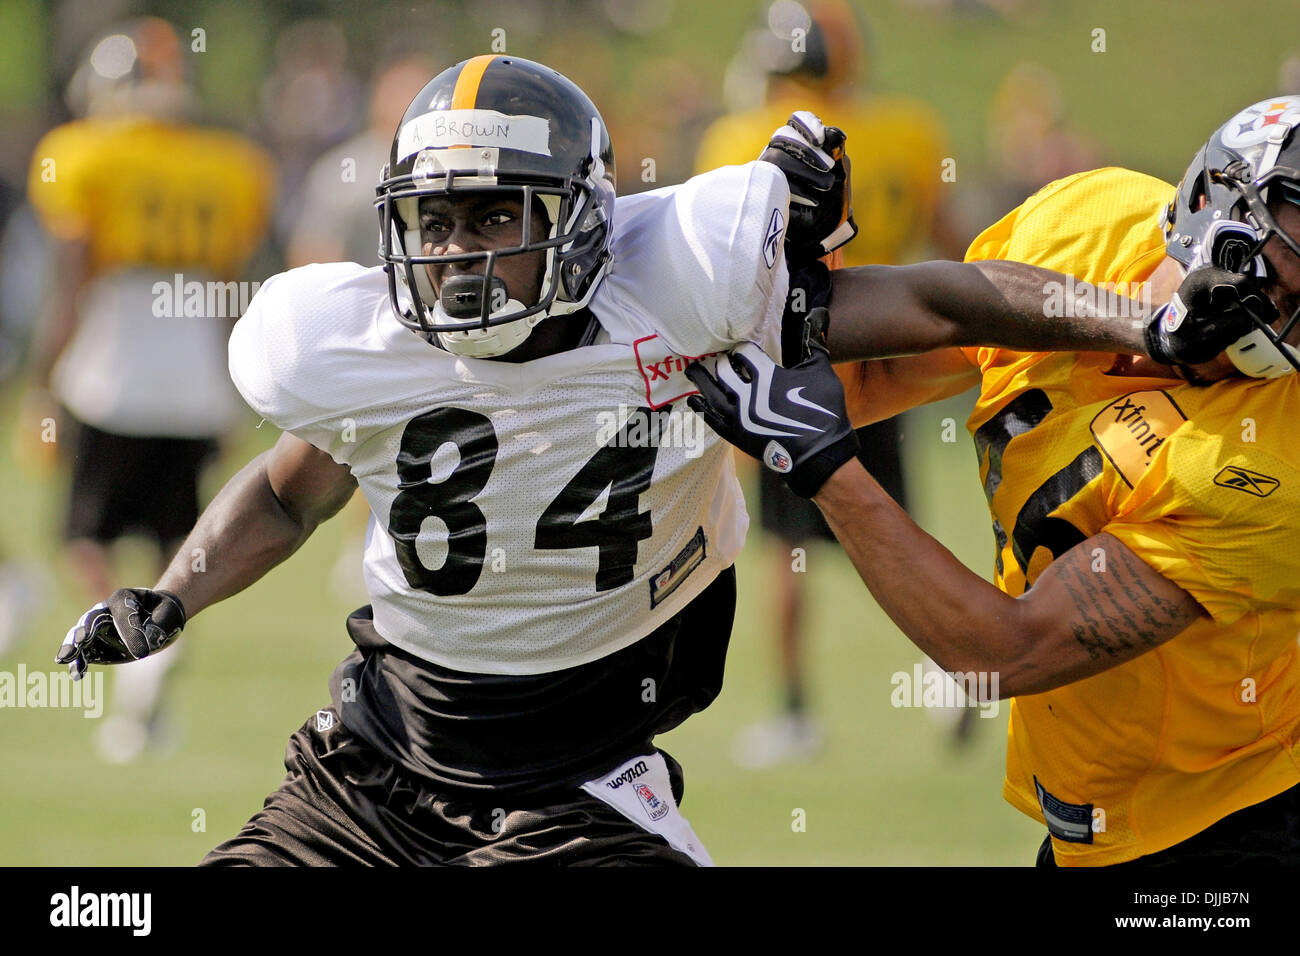 Aug. 09, 2010 - Latrobe, PENNSYLVANNIA, U.S - 09 August, 2010: Pittsburgh Steelers' wide receiver ANTONIO BROWN (84) stiff arms Pittsburgh Steelers' safety JUSTIN THORNTON (46) during a an offense / defense drill during training camp at St. Vincent College in Latrobe, PA...MANDATORY CREDIT: DEAN BEATTIE / SOUTHCREEK GLOBAL (Credit Image: © Dean Beattie/Southcreek Global/ZUMApress.c Stock Photo